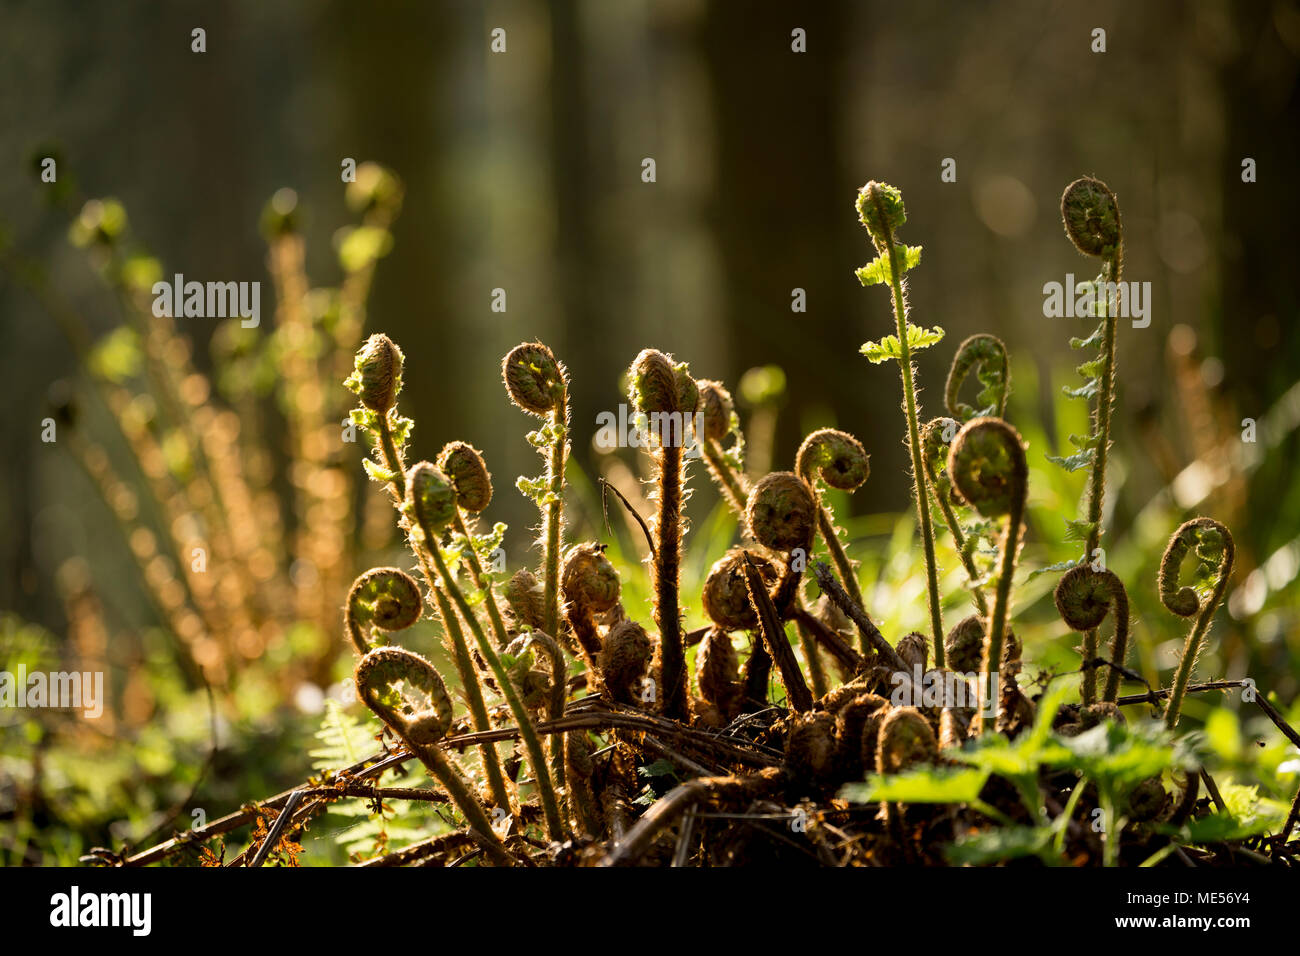 Ferns starting to unfurl in April in a Dorset wood England UK in evening light. Stock Photo